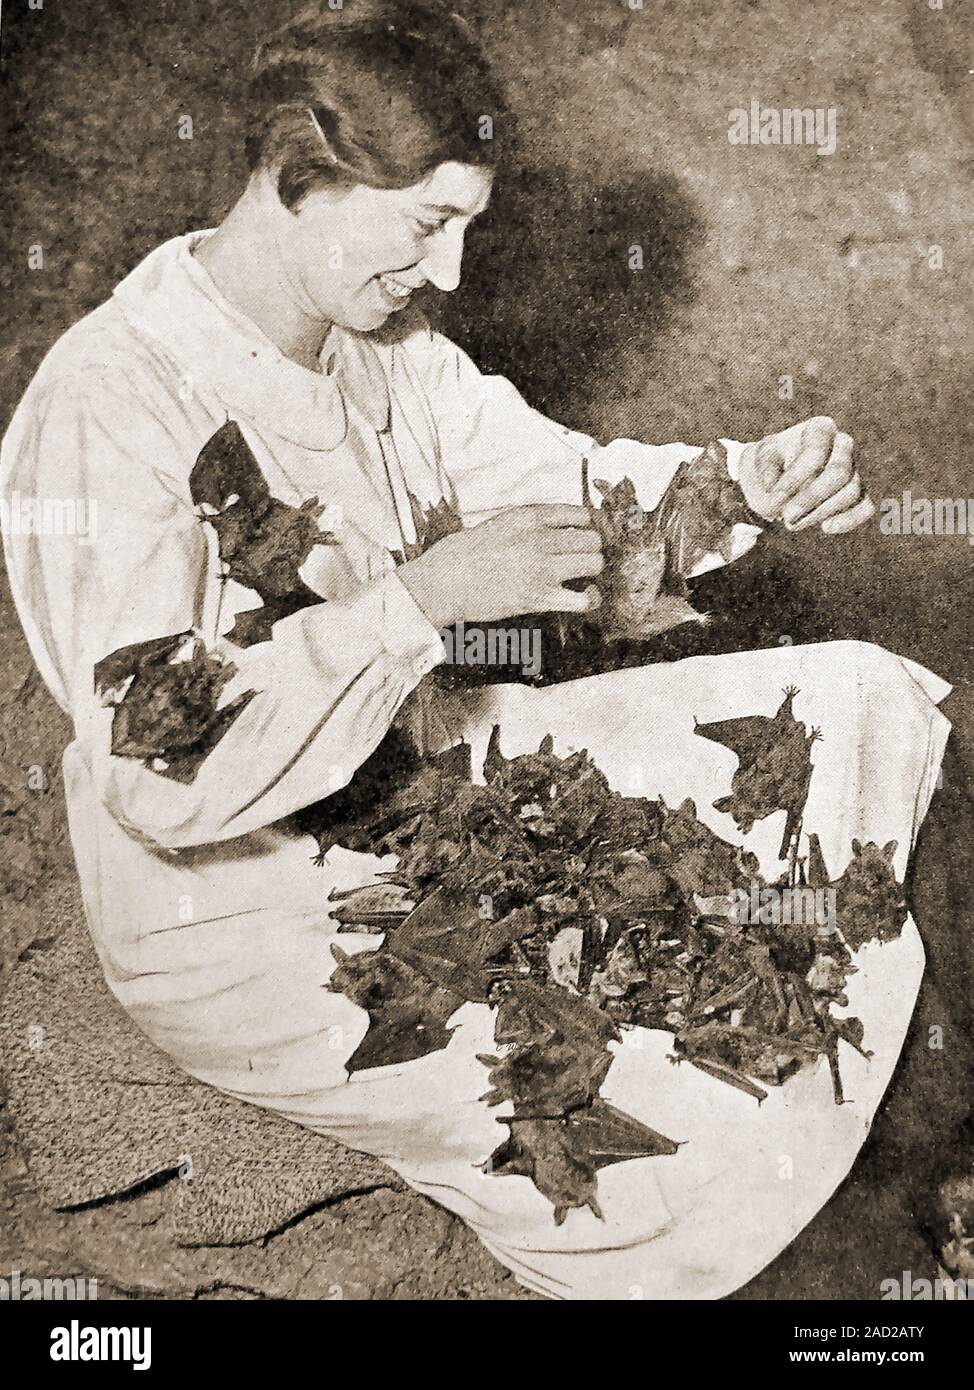 1940s UK - Ringing or tagging bats whilst in their period of hibernation. (all British bats hibernate and contrary to public opinion, they can see reasonably well with their eyes). Stock Photo